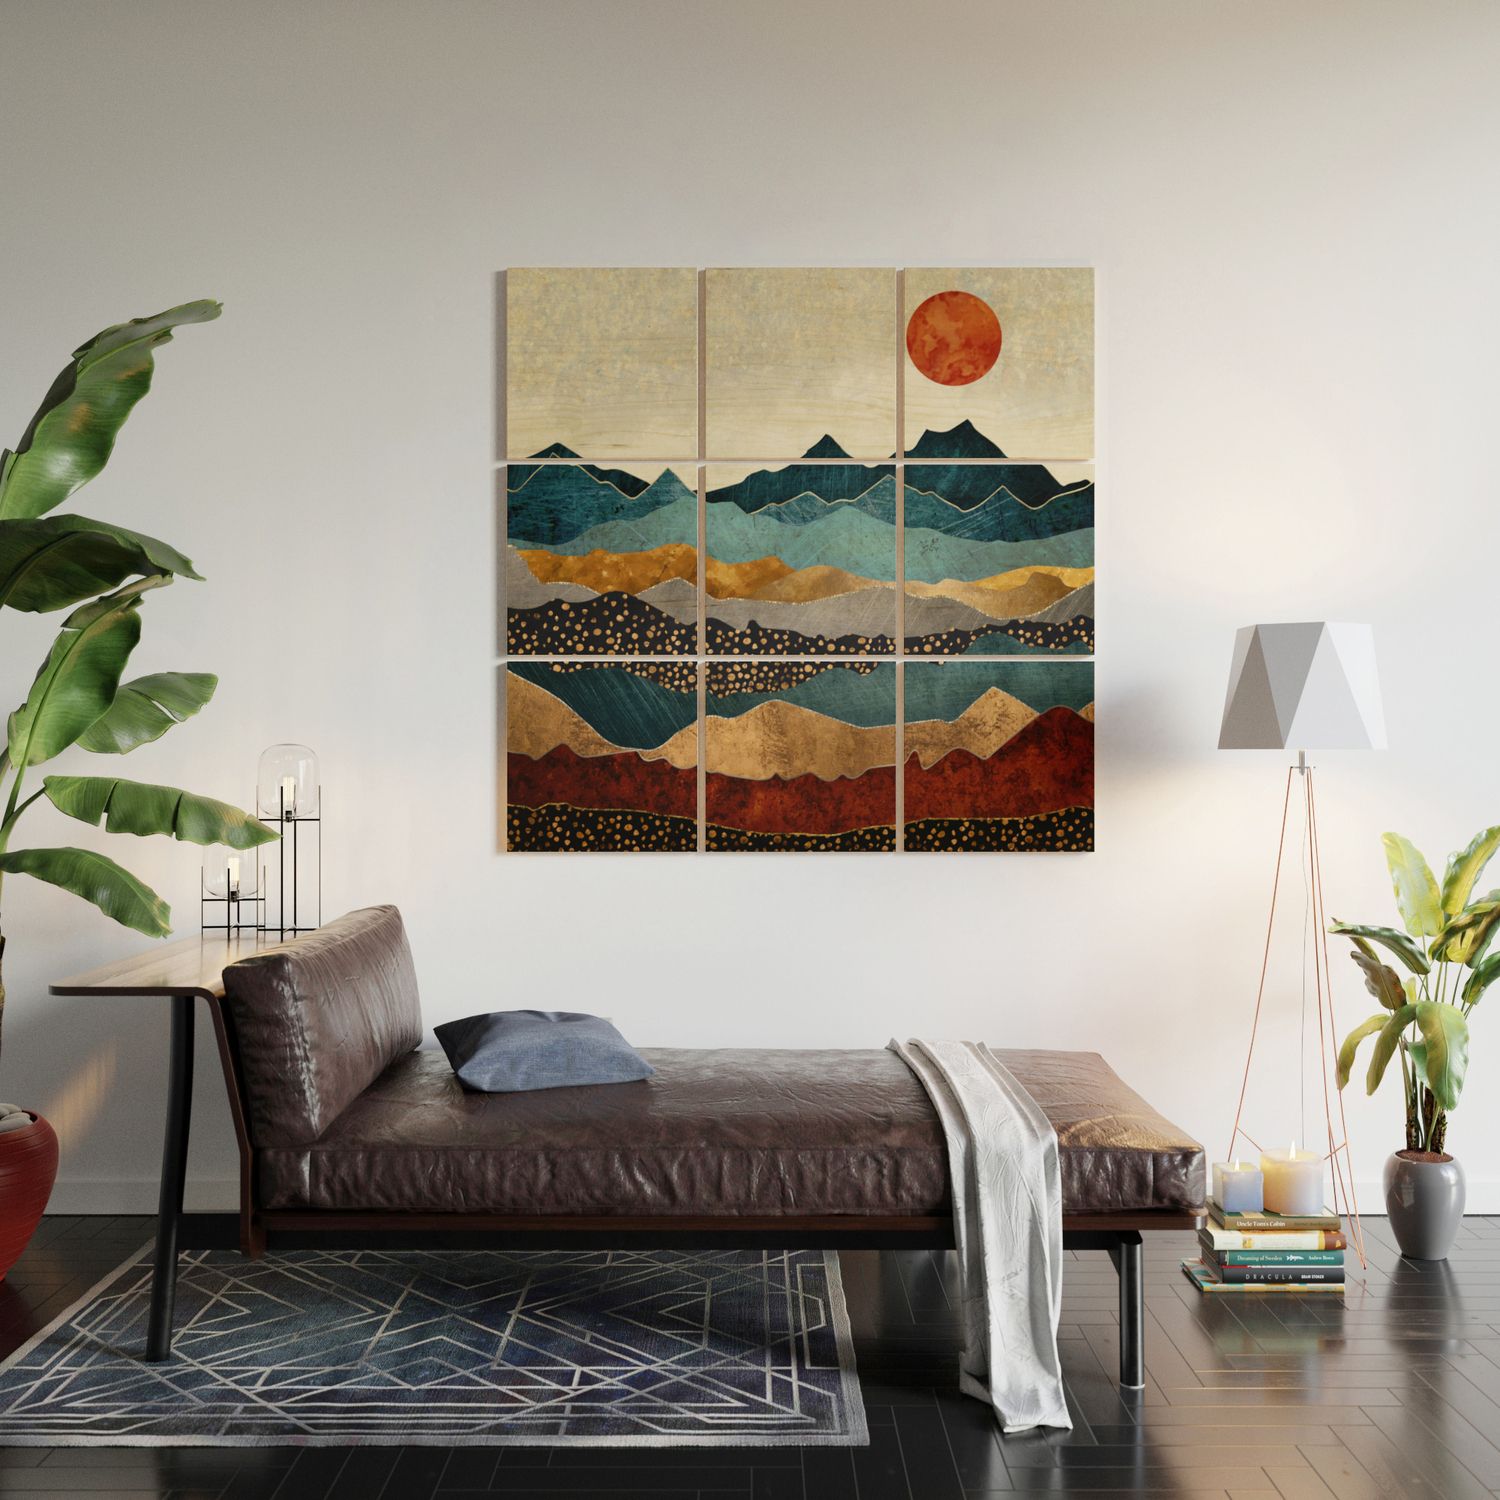 Amber Dusk Wood Wall Artspacefrogdesigns | Society6 Inside Most Up To Date Amber Dusk Wood Wall Art (View 4 of 20)